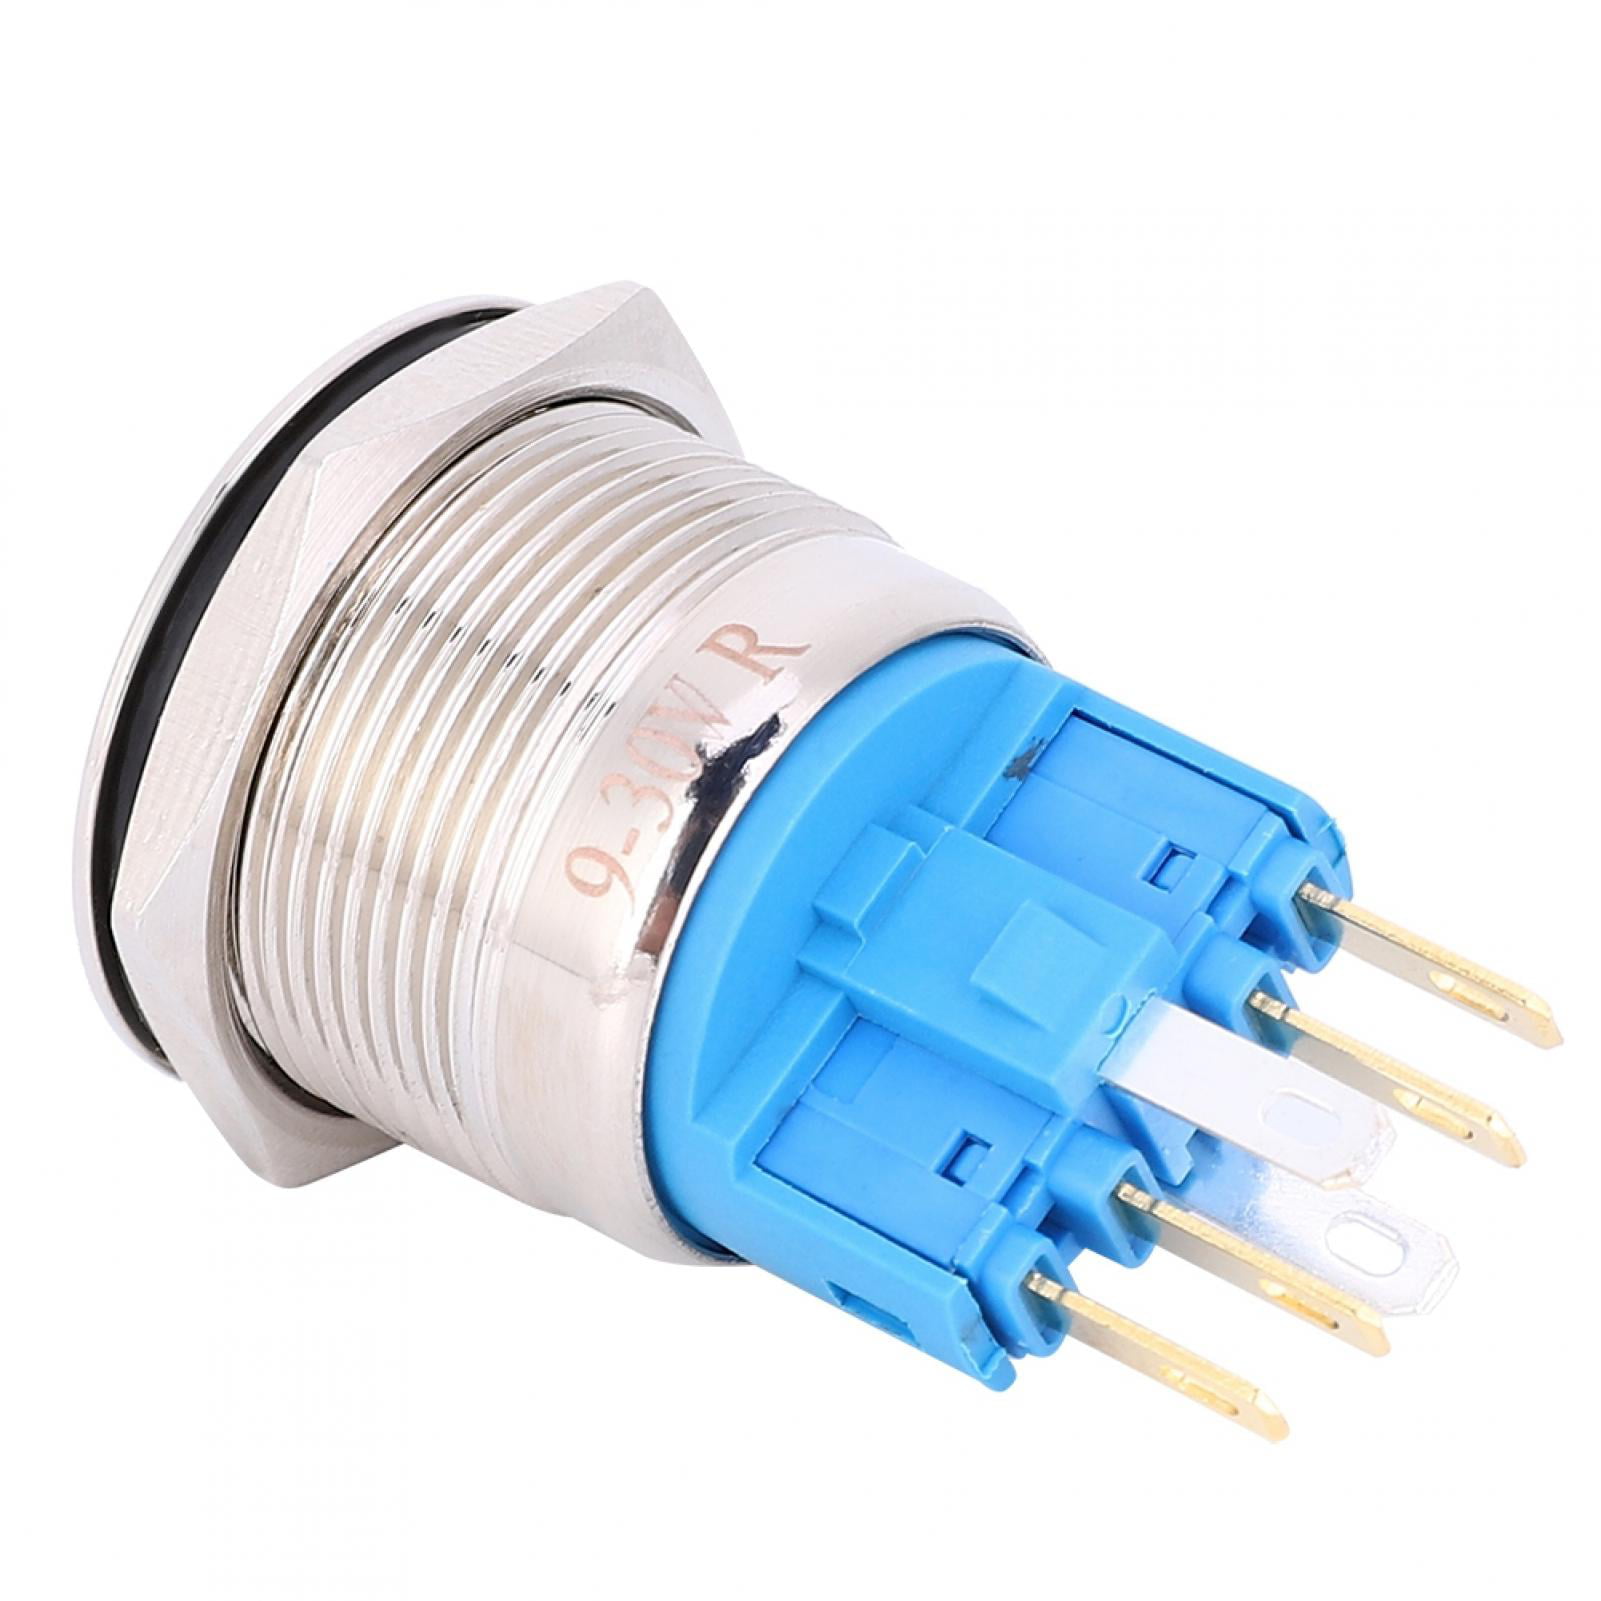 uxcell Signal Warning Light Six Wire Push Switch Connecting Cable 30cm Length for 6pin 22mm Push Switches 